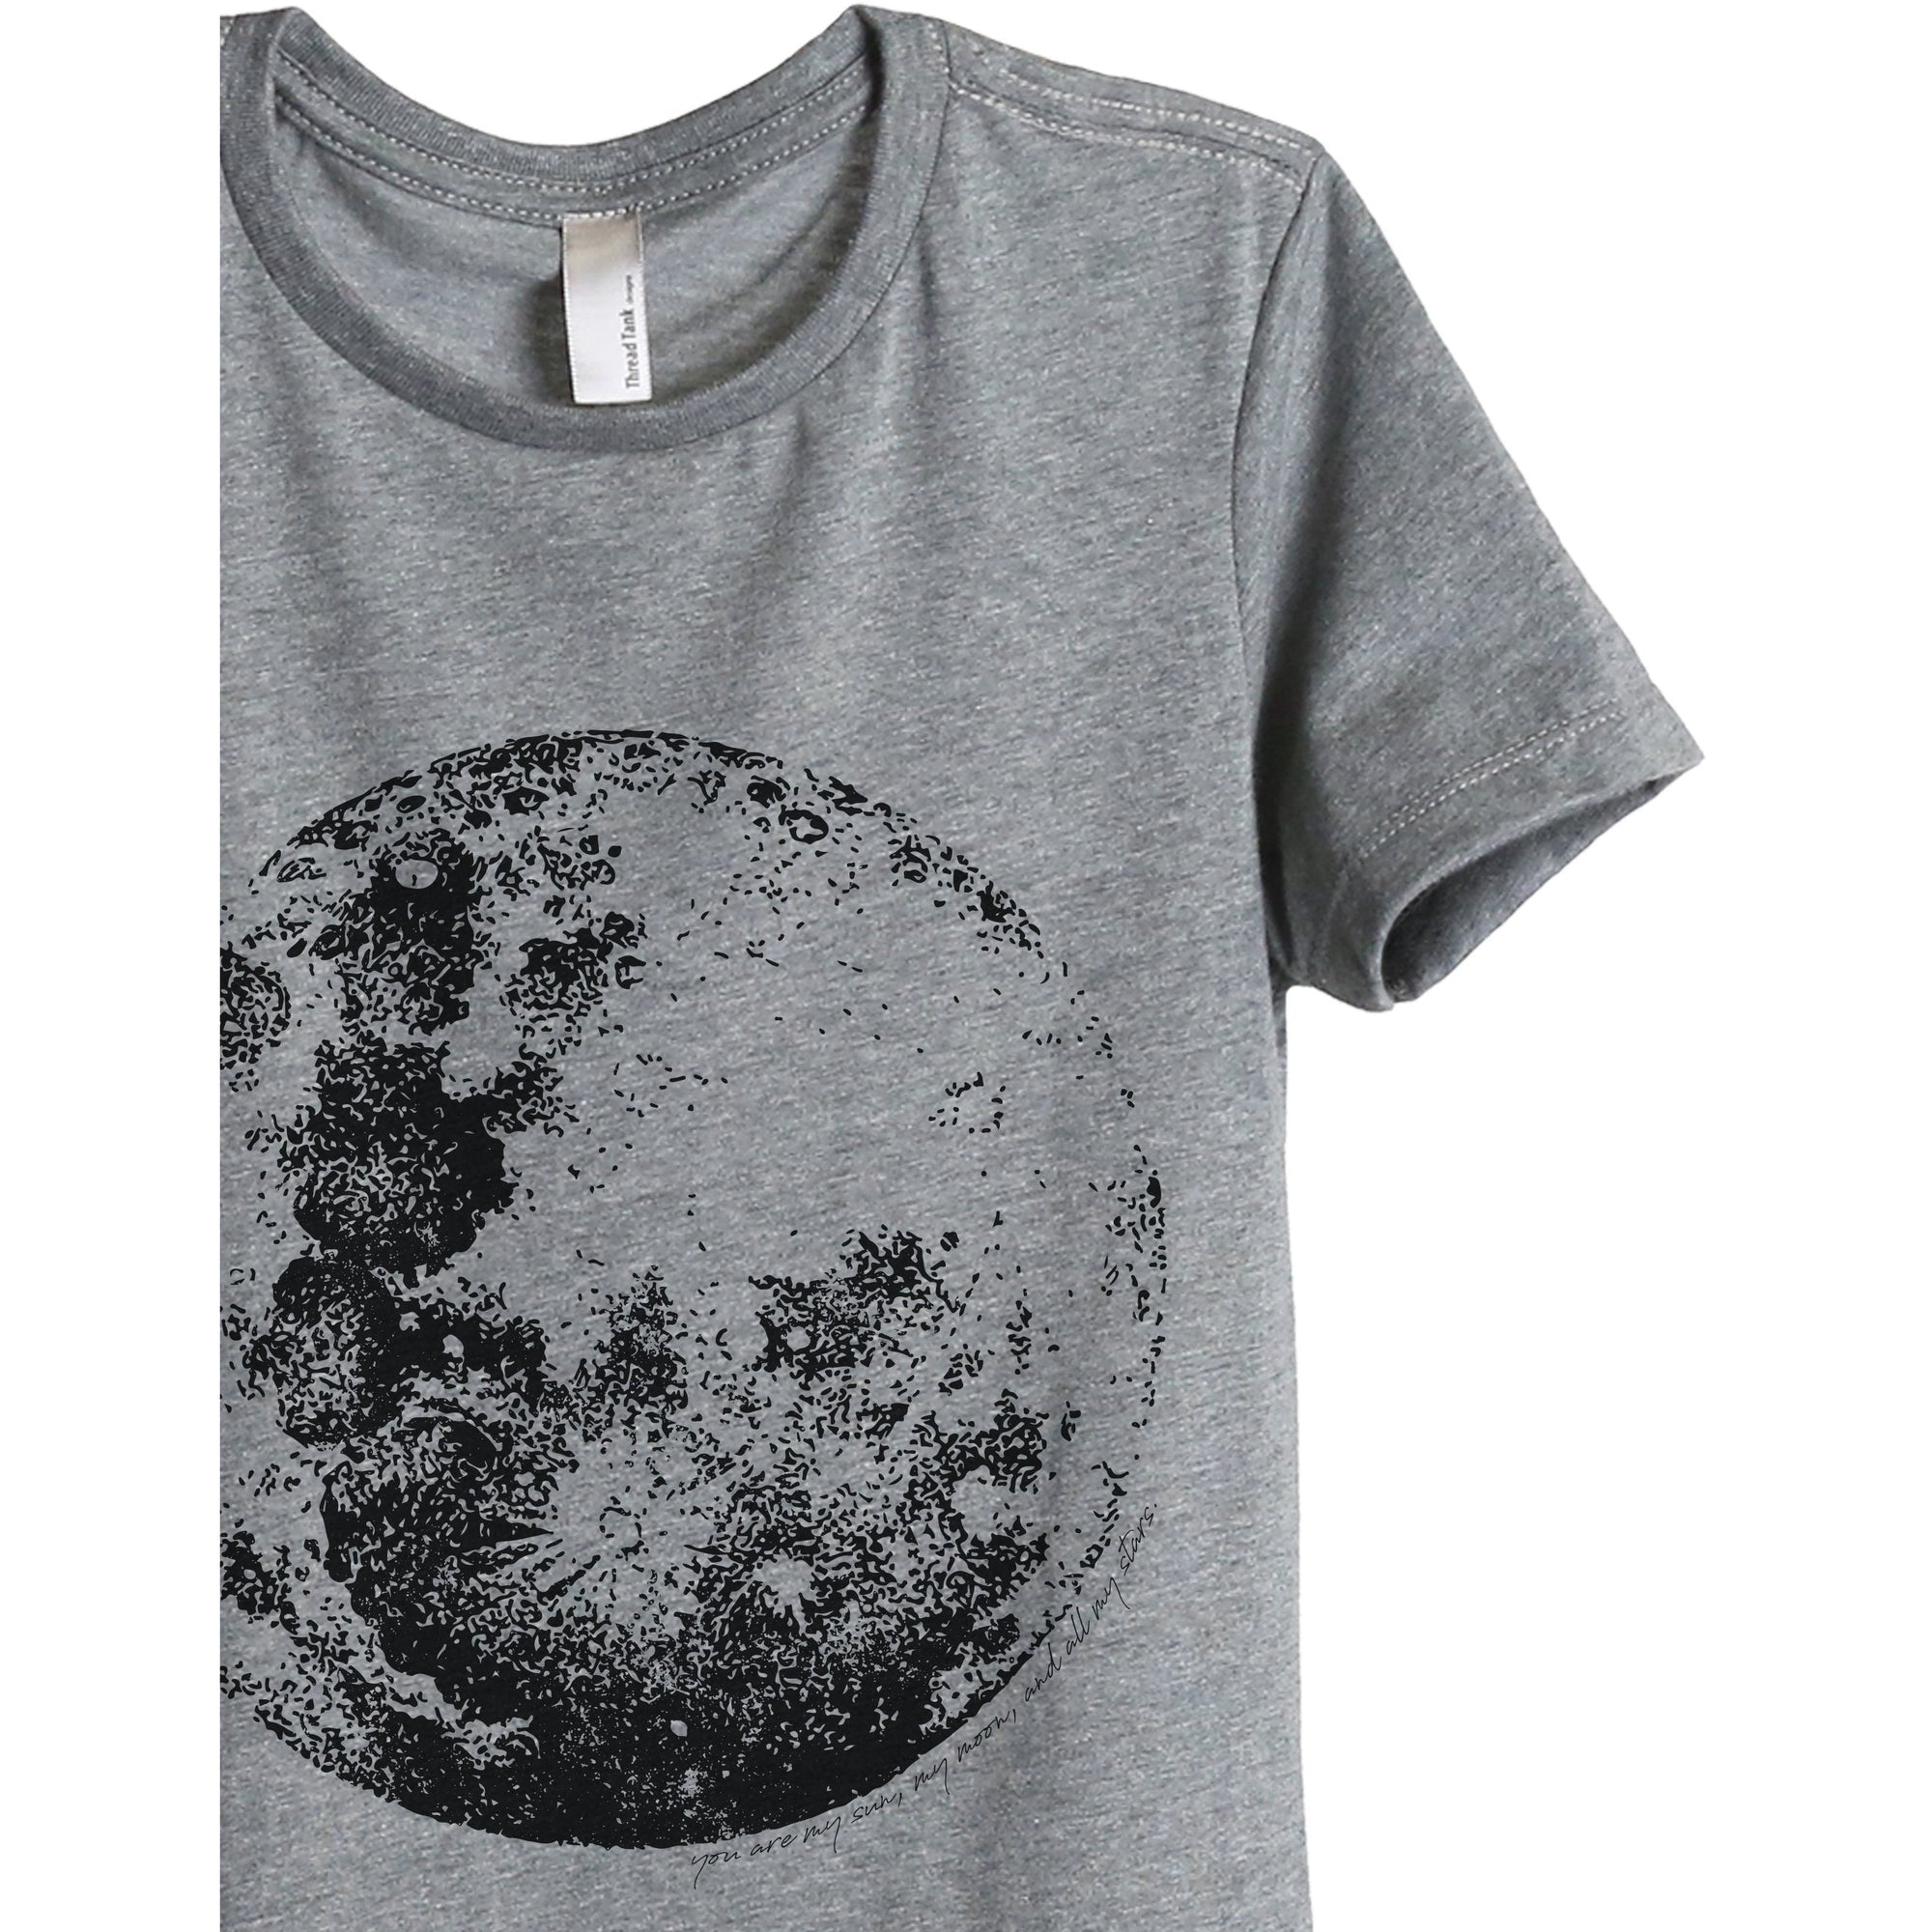 Full Moon Women's Relaxed Crewneck T-Shirt Top Tee Heather Grey Zoom Details
